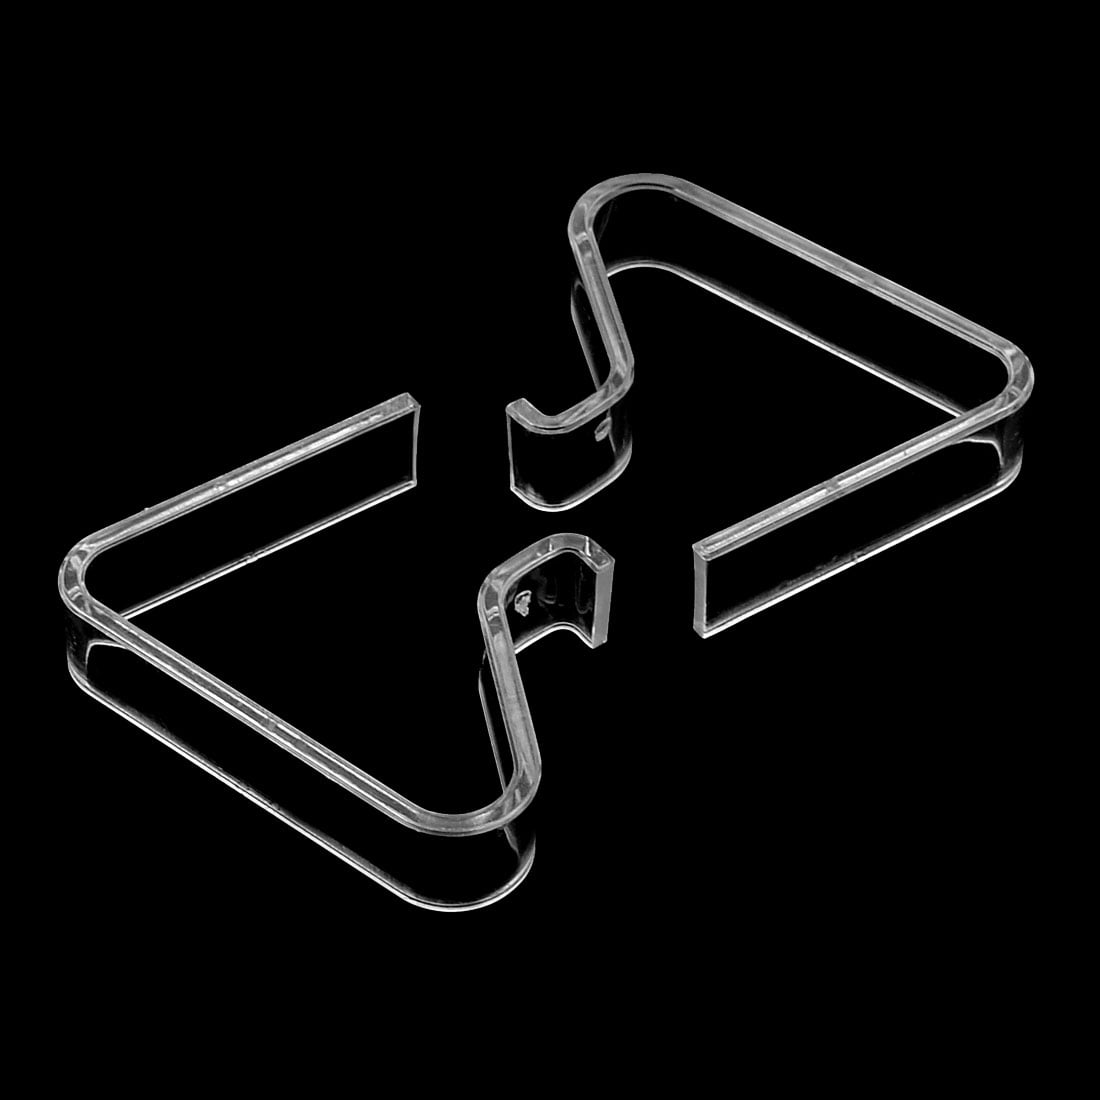 Tablecloth Clips, Picnic Table Clips Flexible Stainless Steel